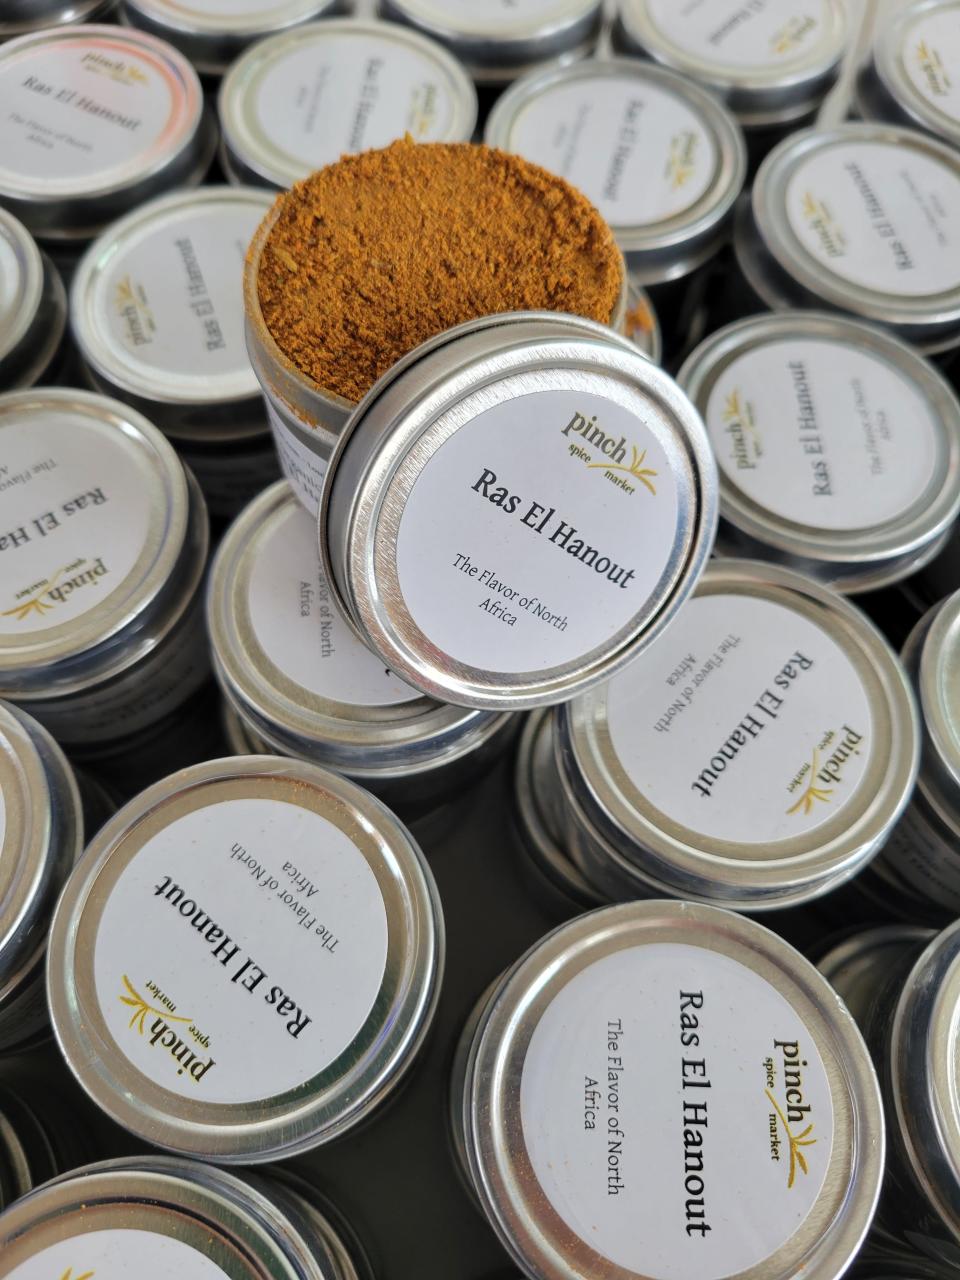 Ra El Hanout is one of the many spice blends available at Louisville-based Pinch Spice Market.